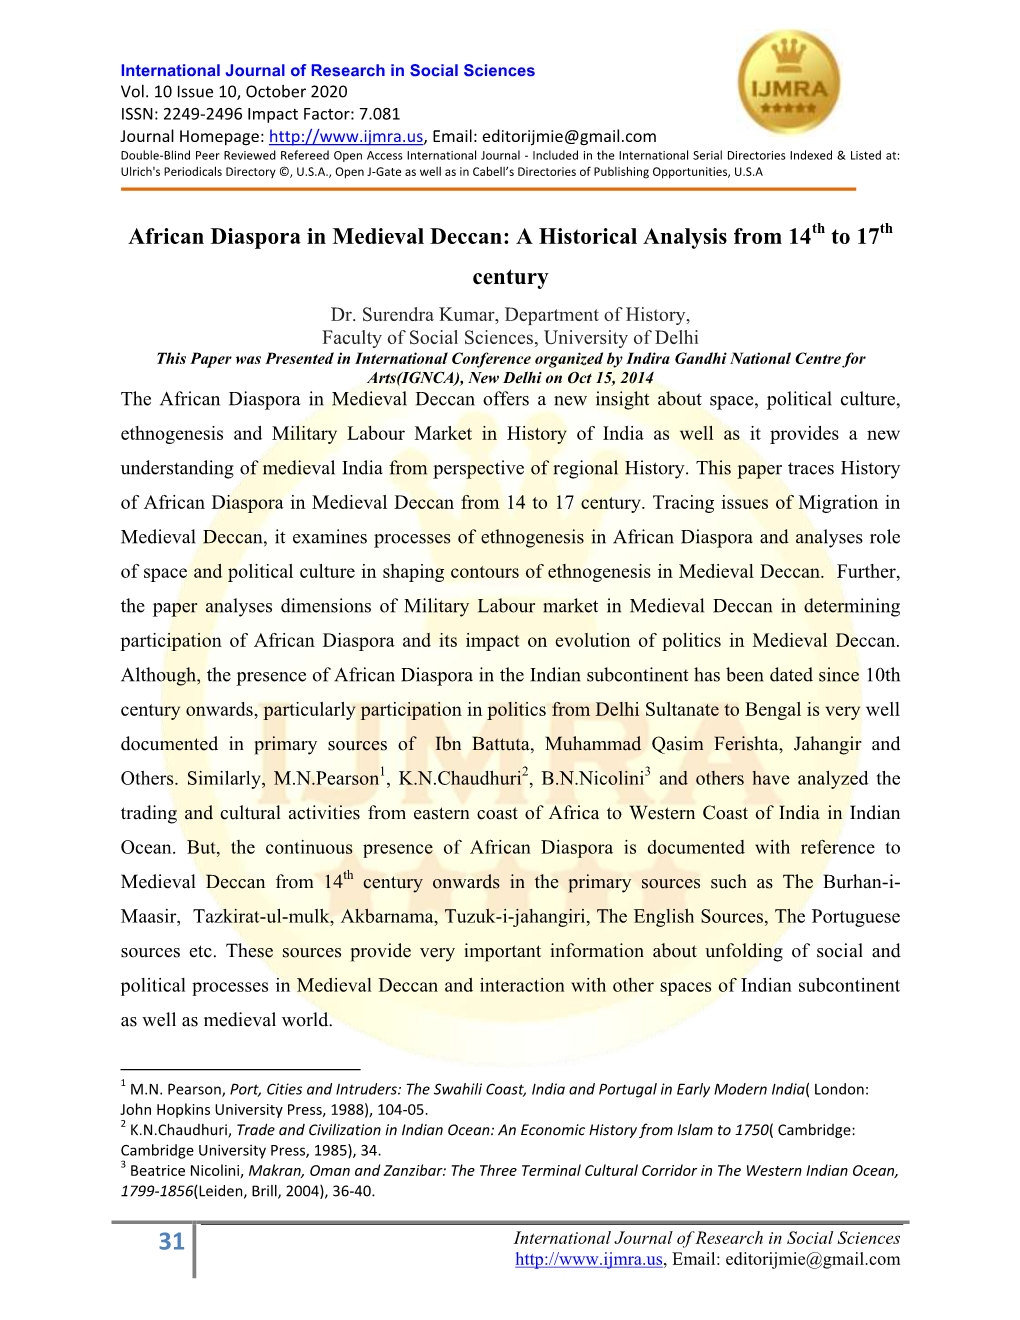 African Diaspora in Medieval Deccan: a Historical Analysis from 14Th to 17Th Century Dr